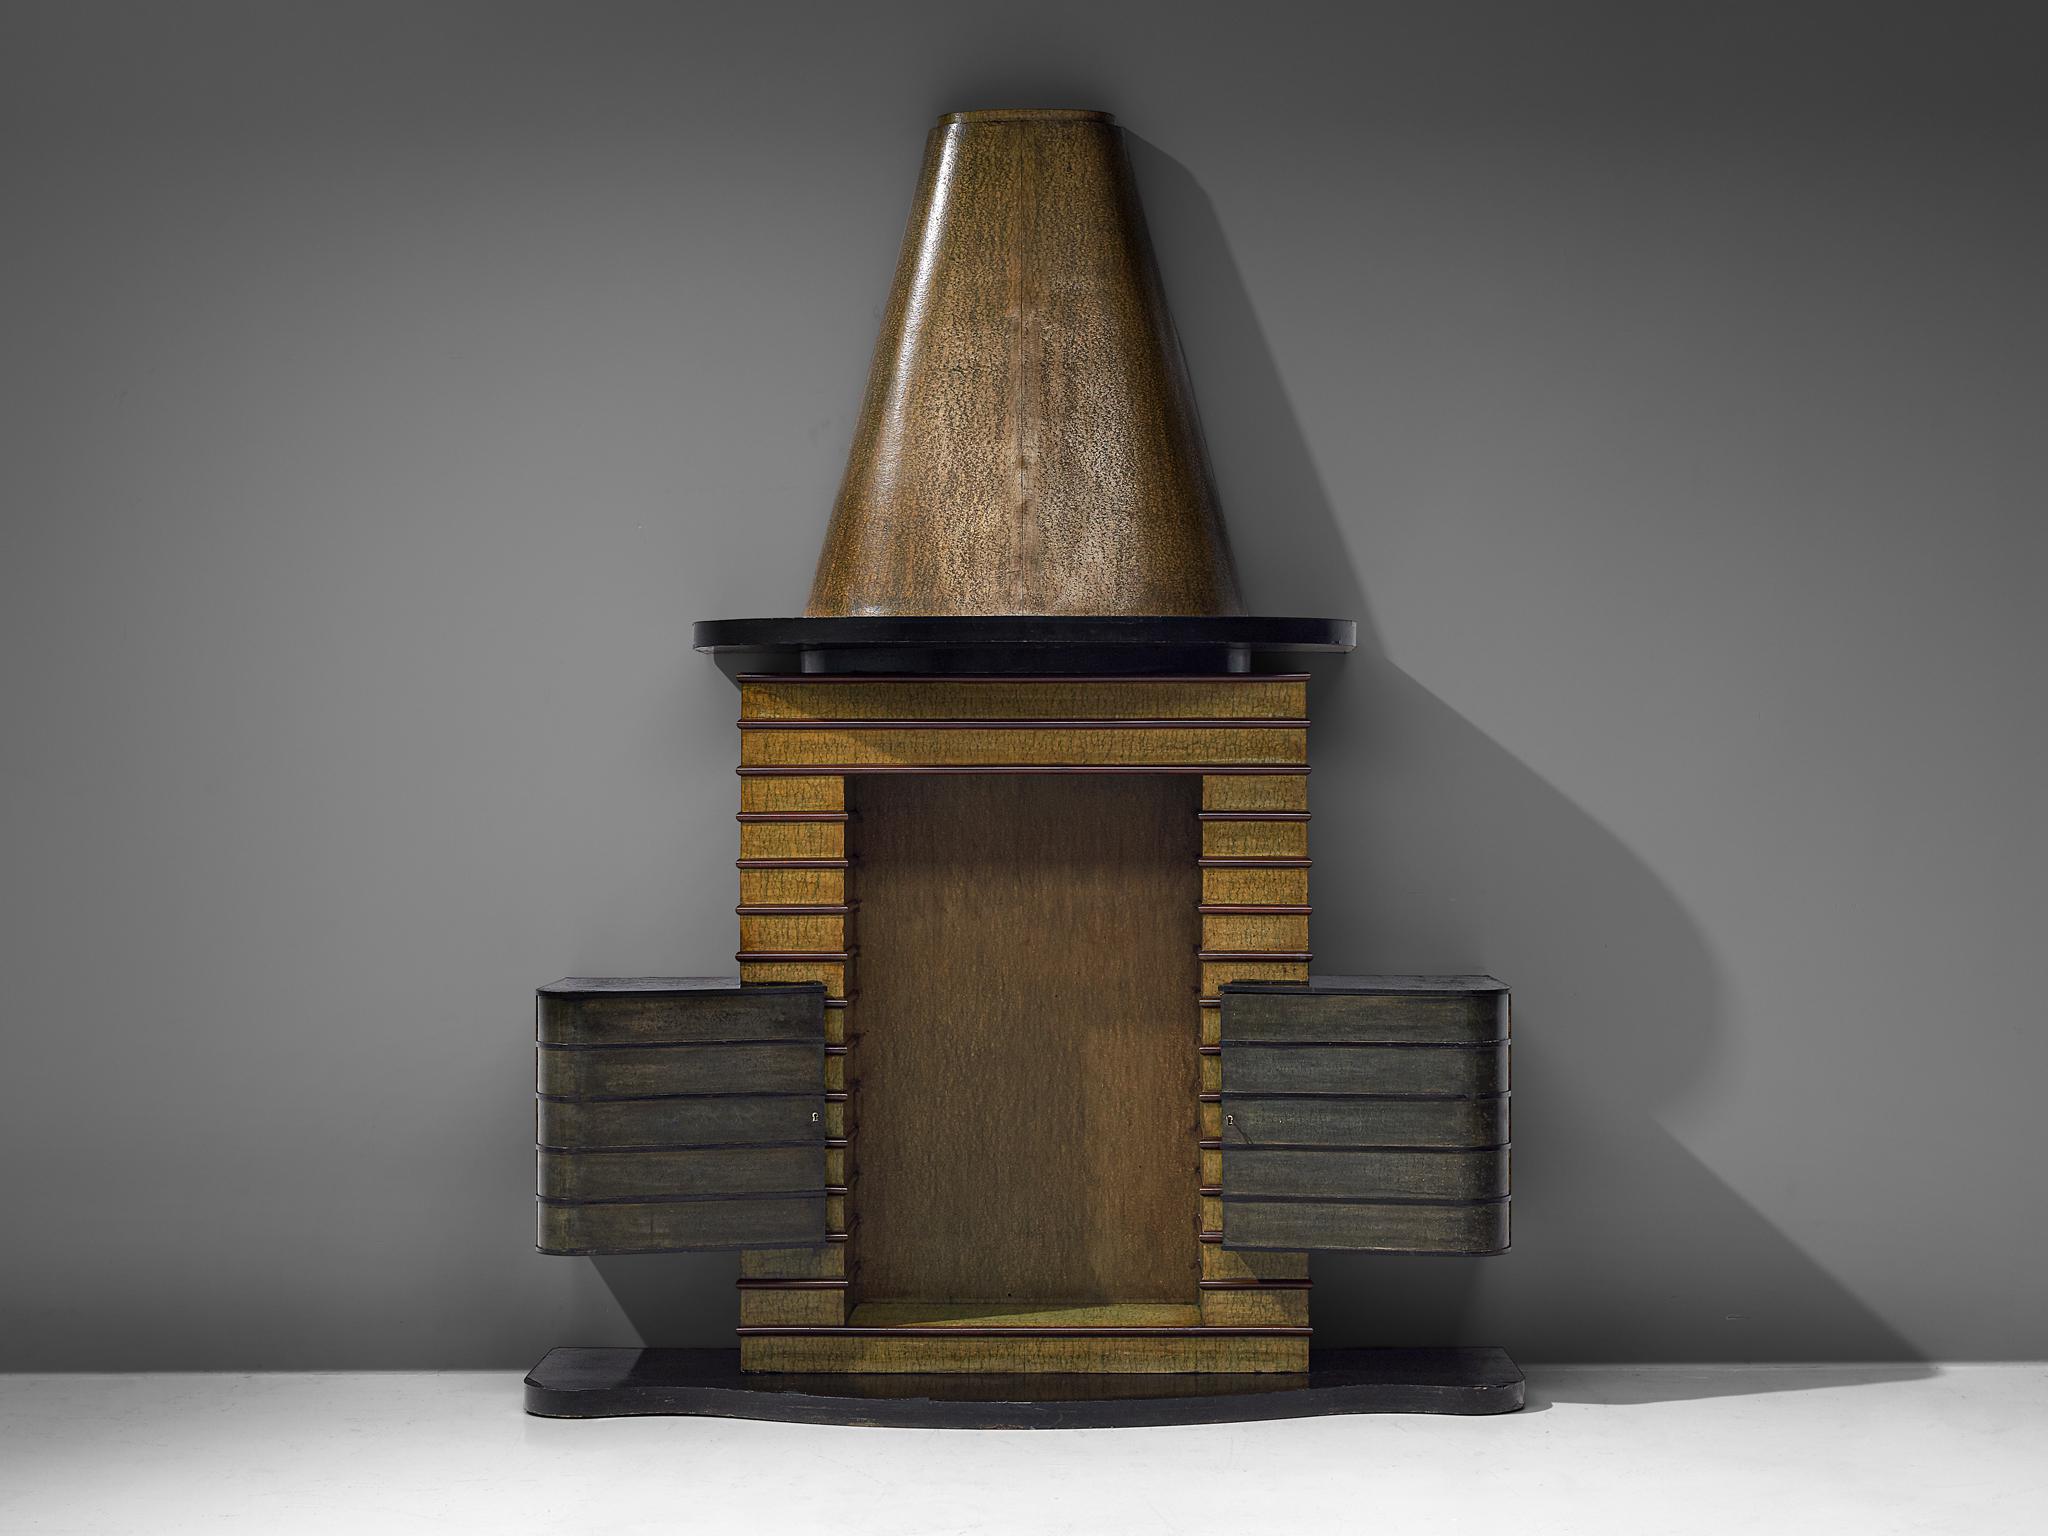 Vittorio Valabrega, bar cabinet, wood, Italy, 1930s

A bar cabinet by the Italian artist and designer Vittorio Valabrega from the 1930s. The cabinet features an organic shaped base in black lacquer. The storage area consists of three elements, one